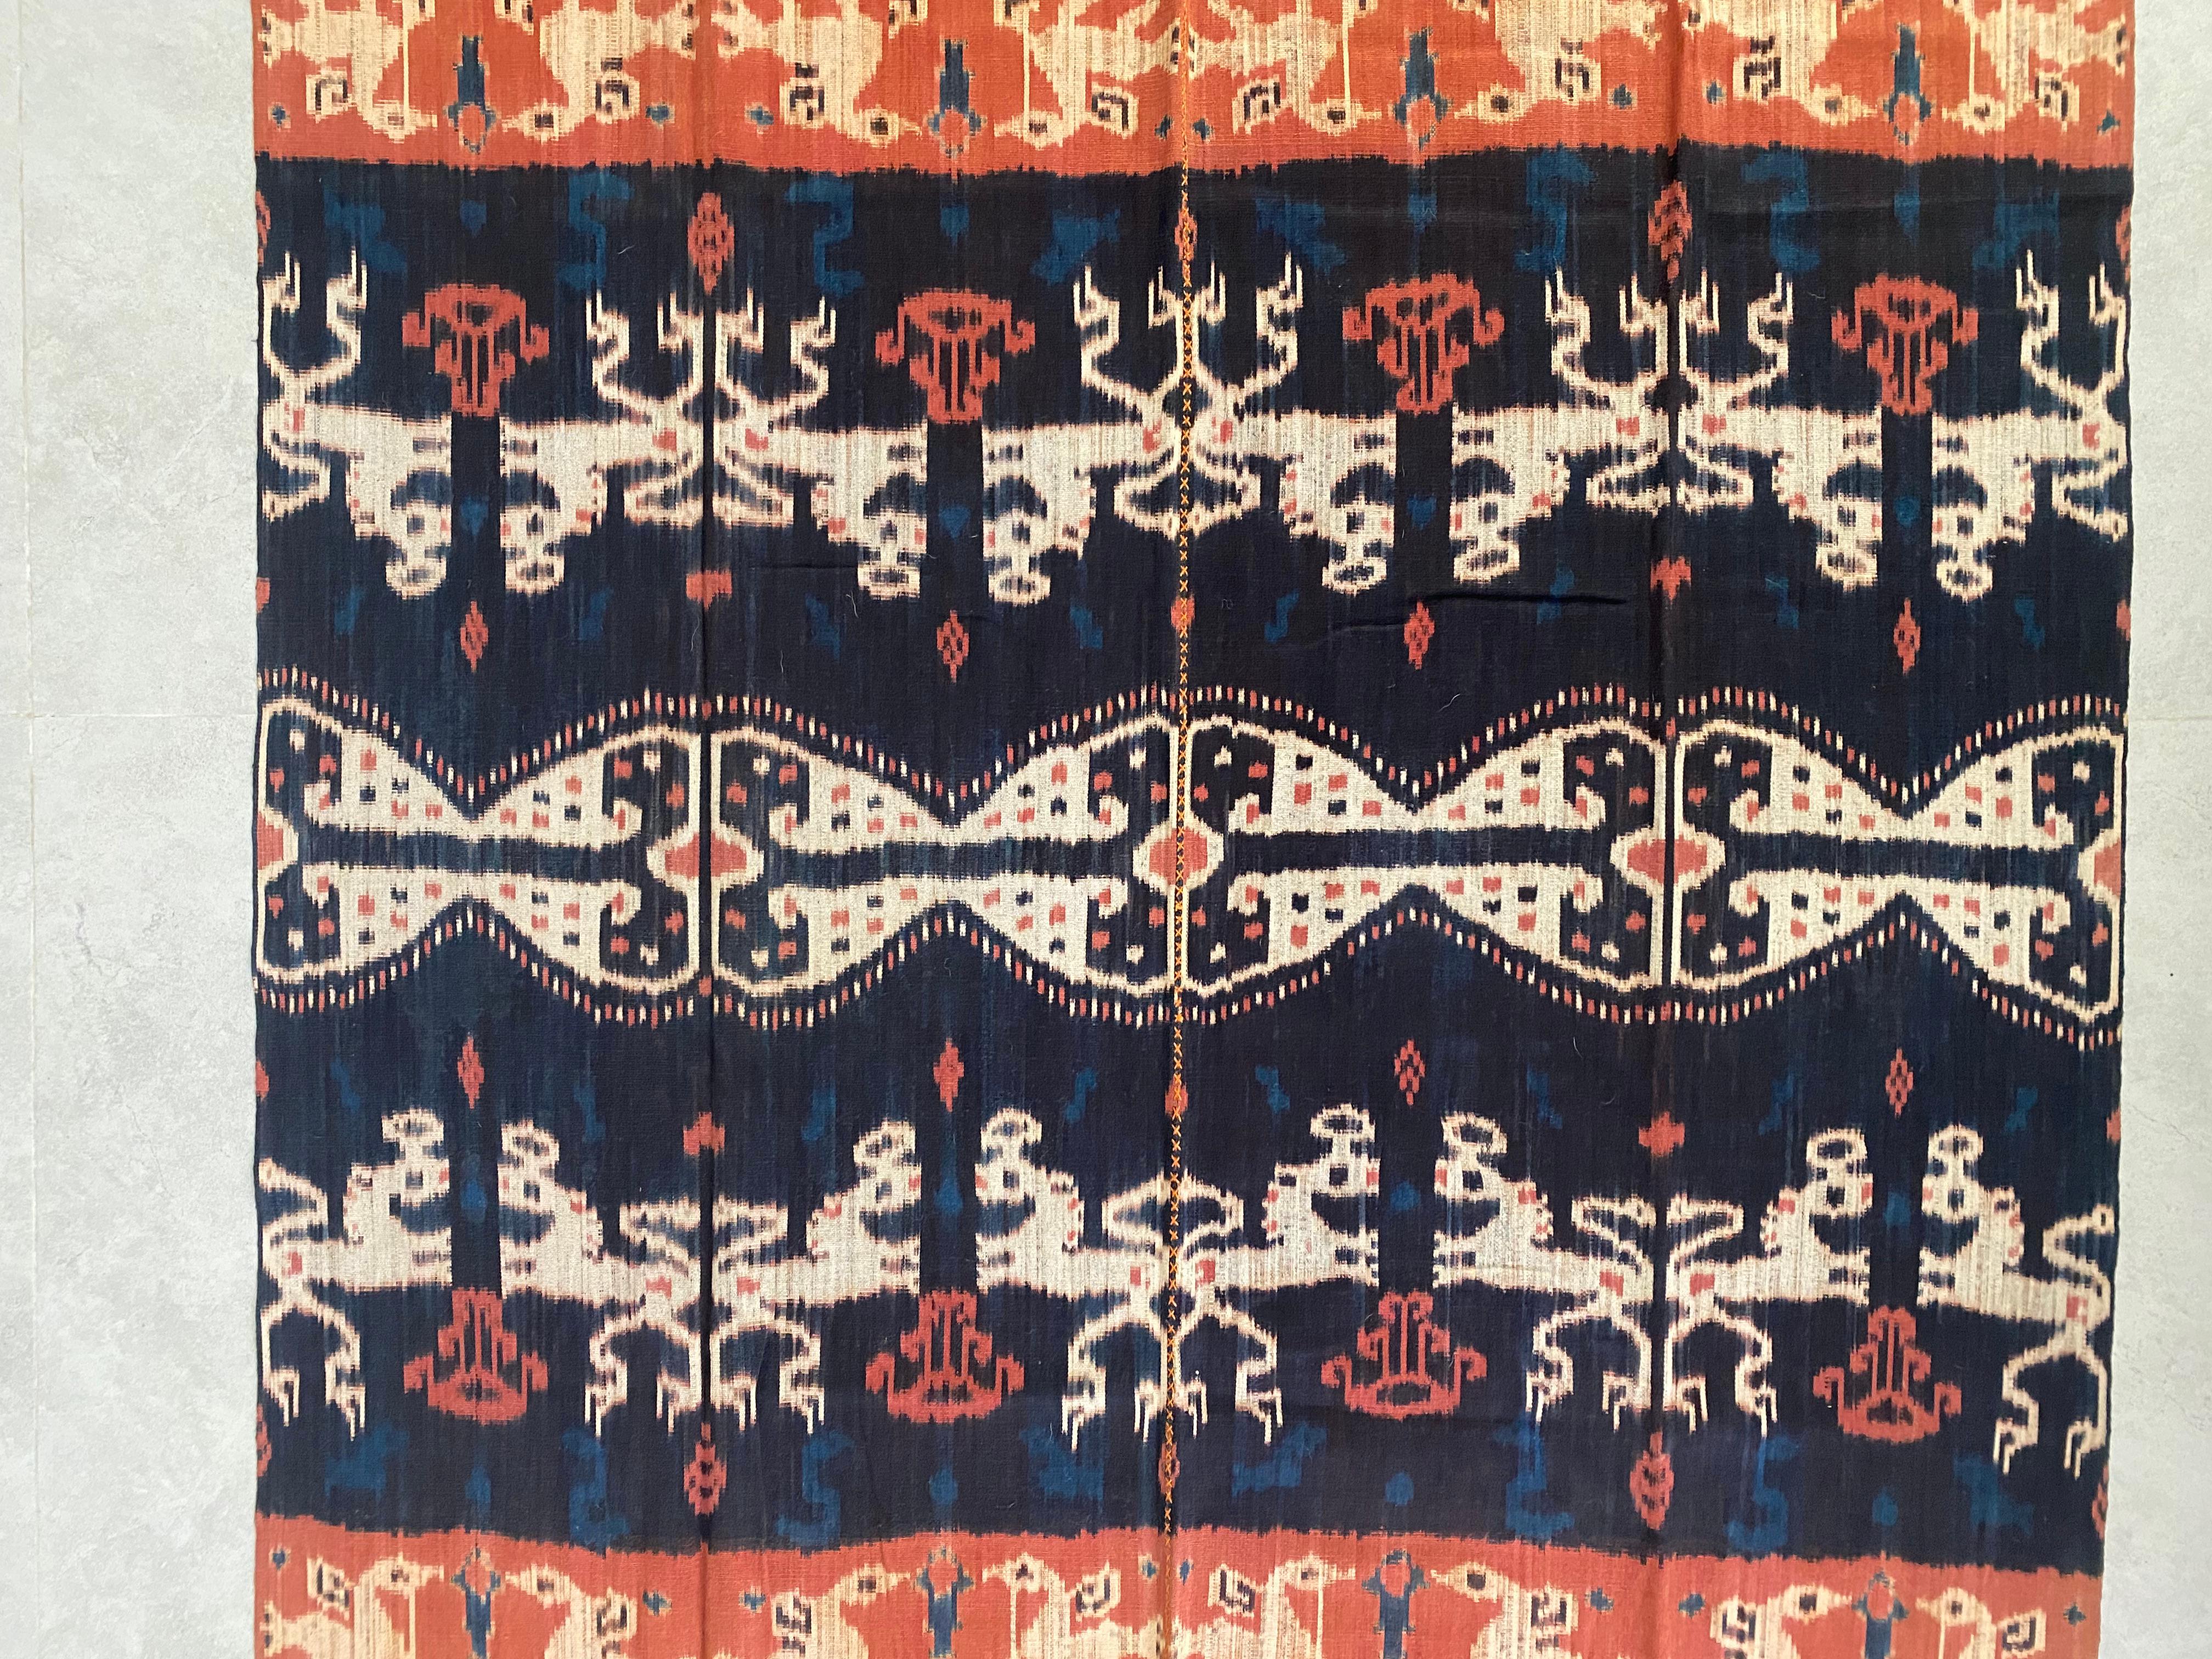 This Ikat textile originates from the Island of Sumba, Indonesia. It is hand-woven using naturally dyed yarns via a method passed on through generations. It features a predominantly dark blue background with orange coloured detailing along with